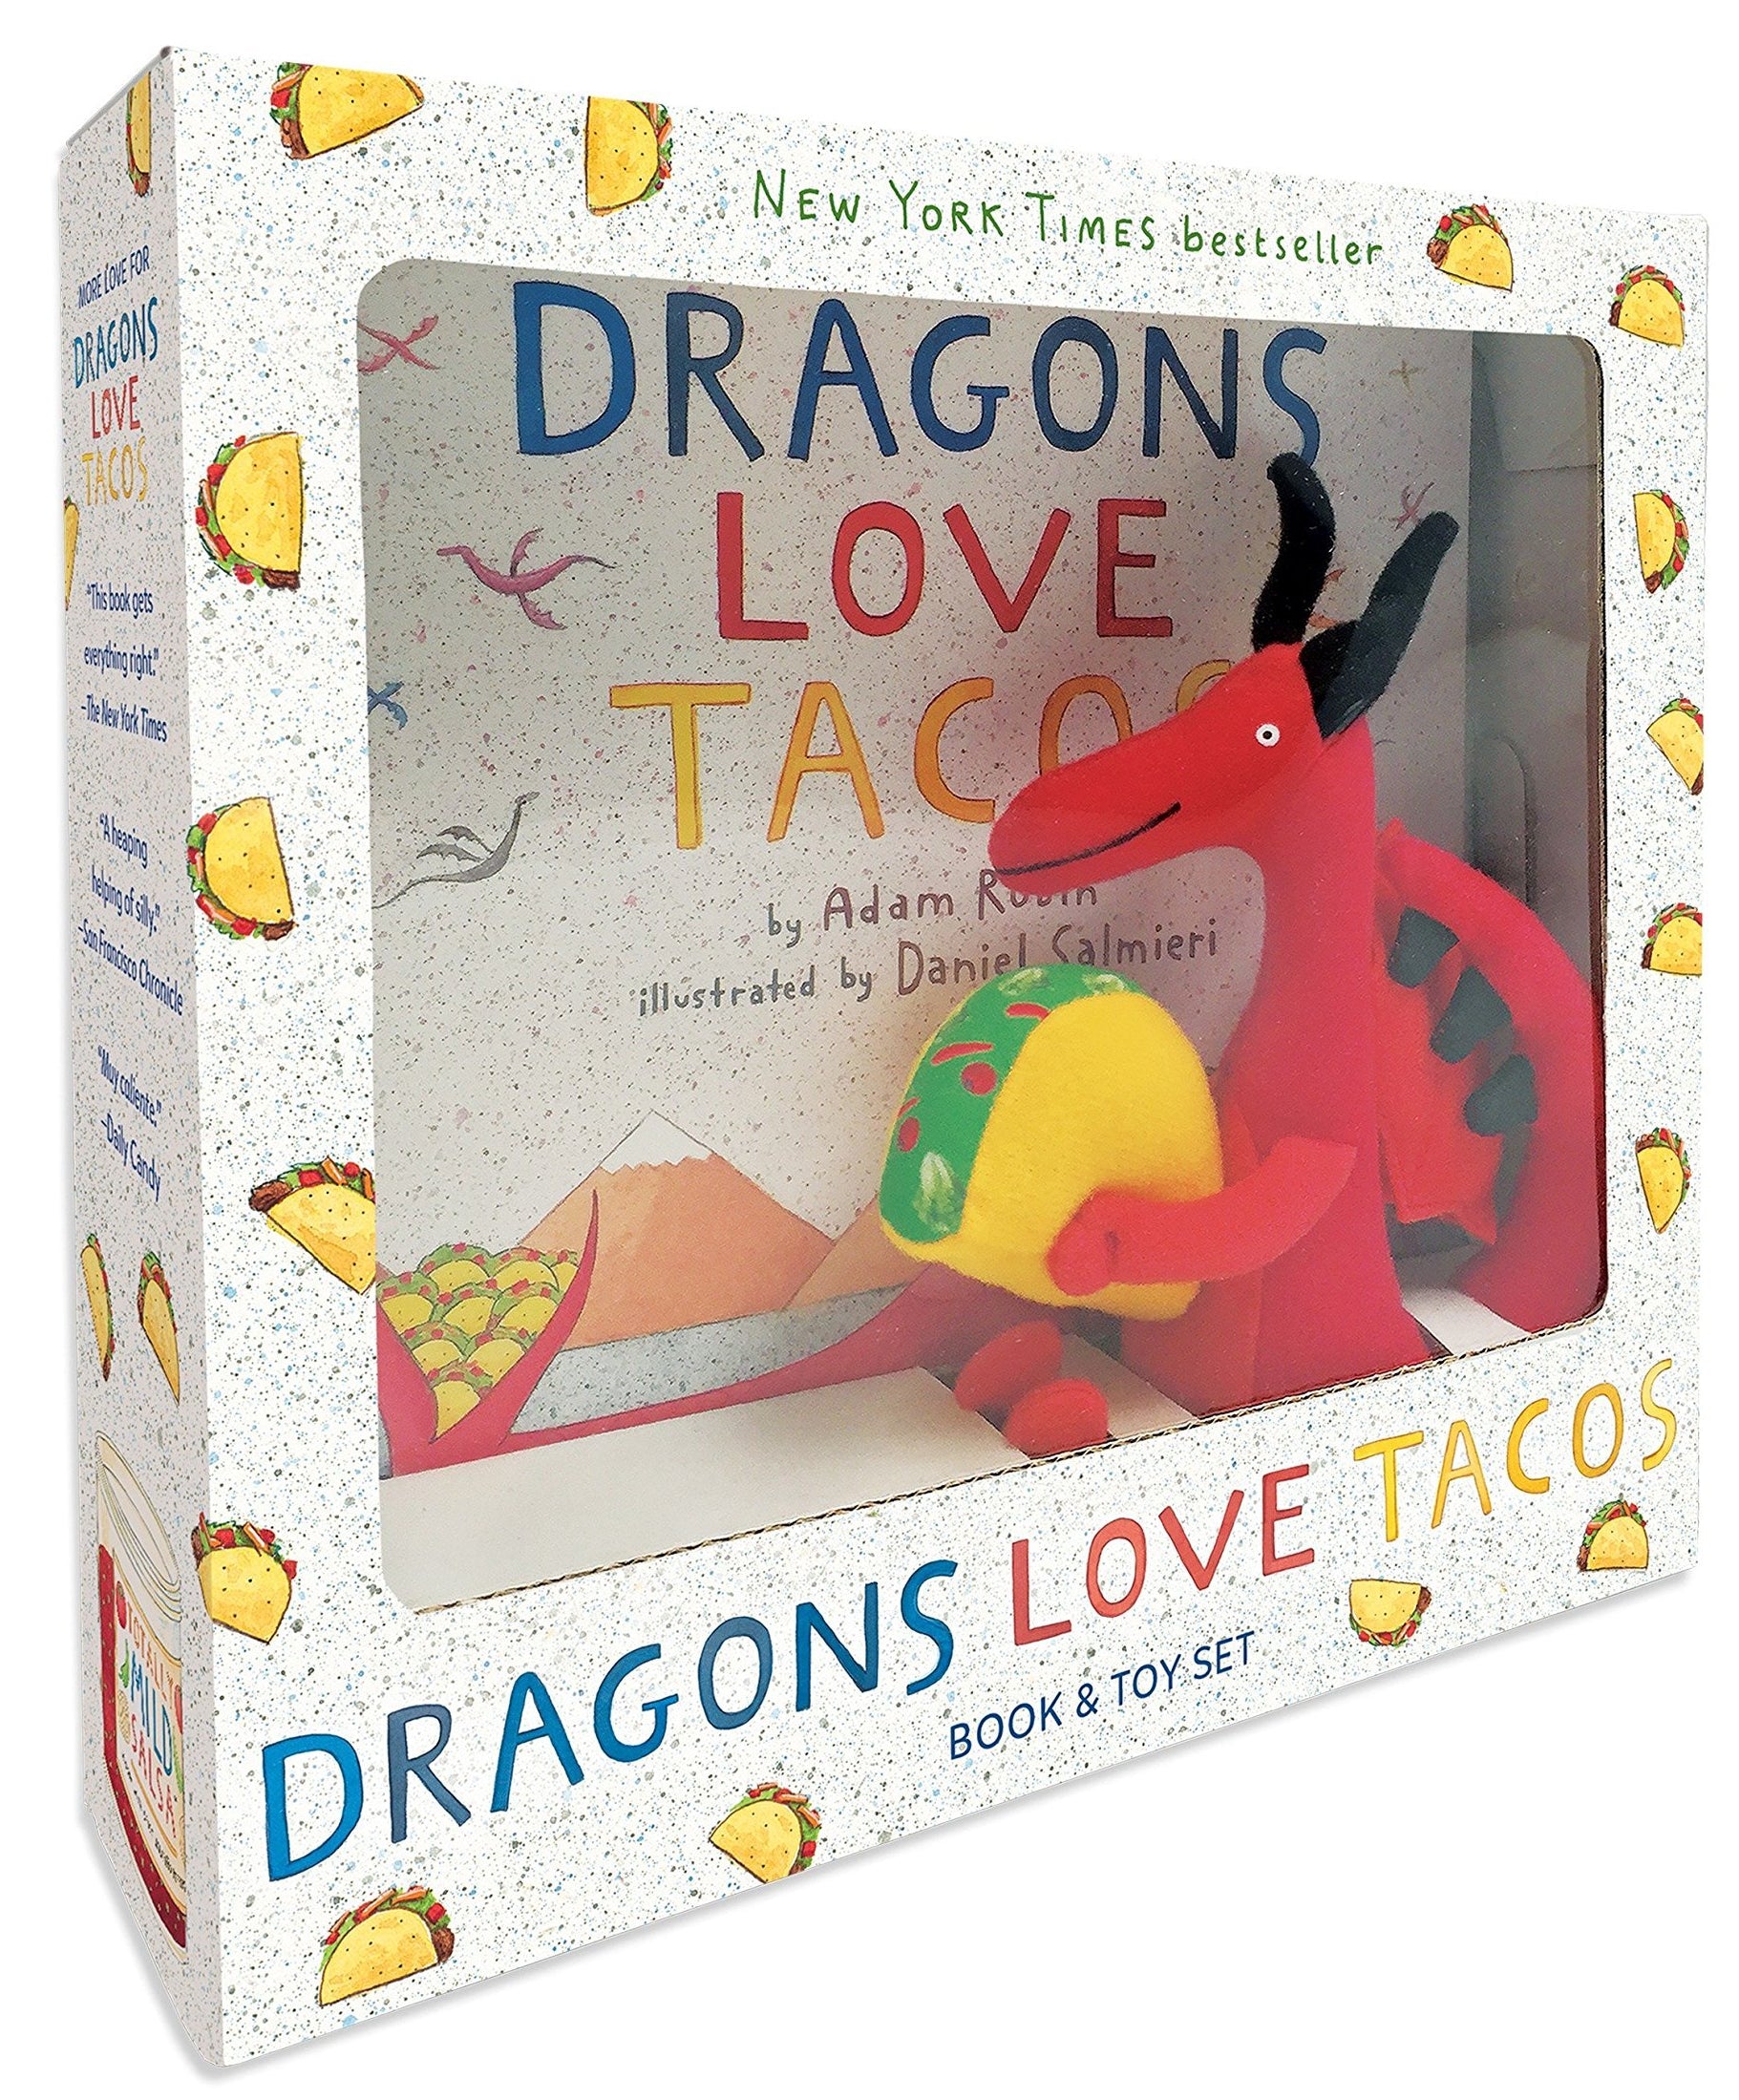 Dragons Love Tacos: Toy & Book Set